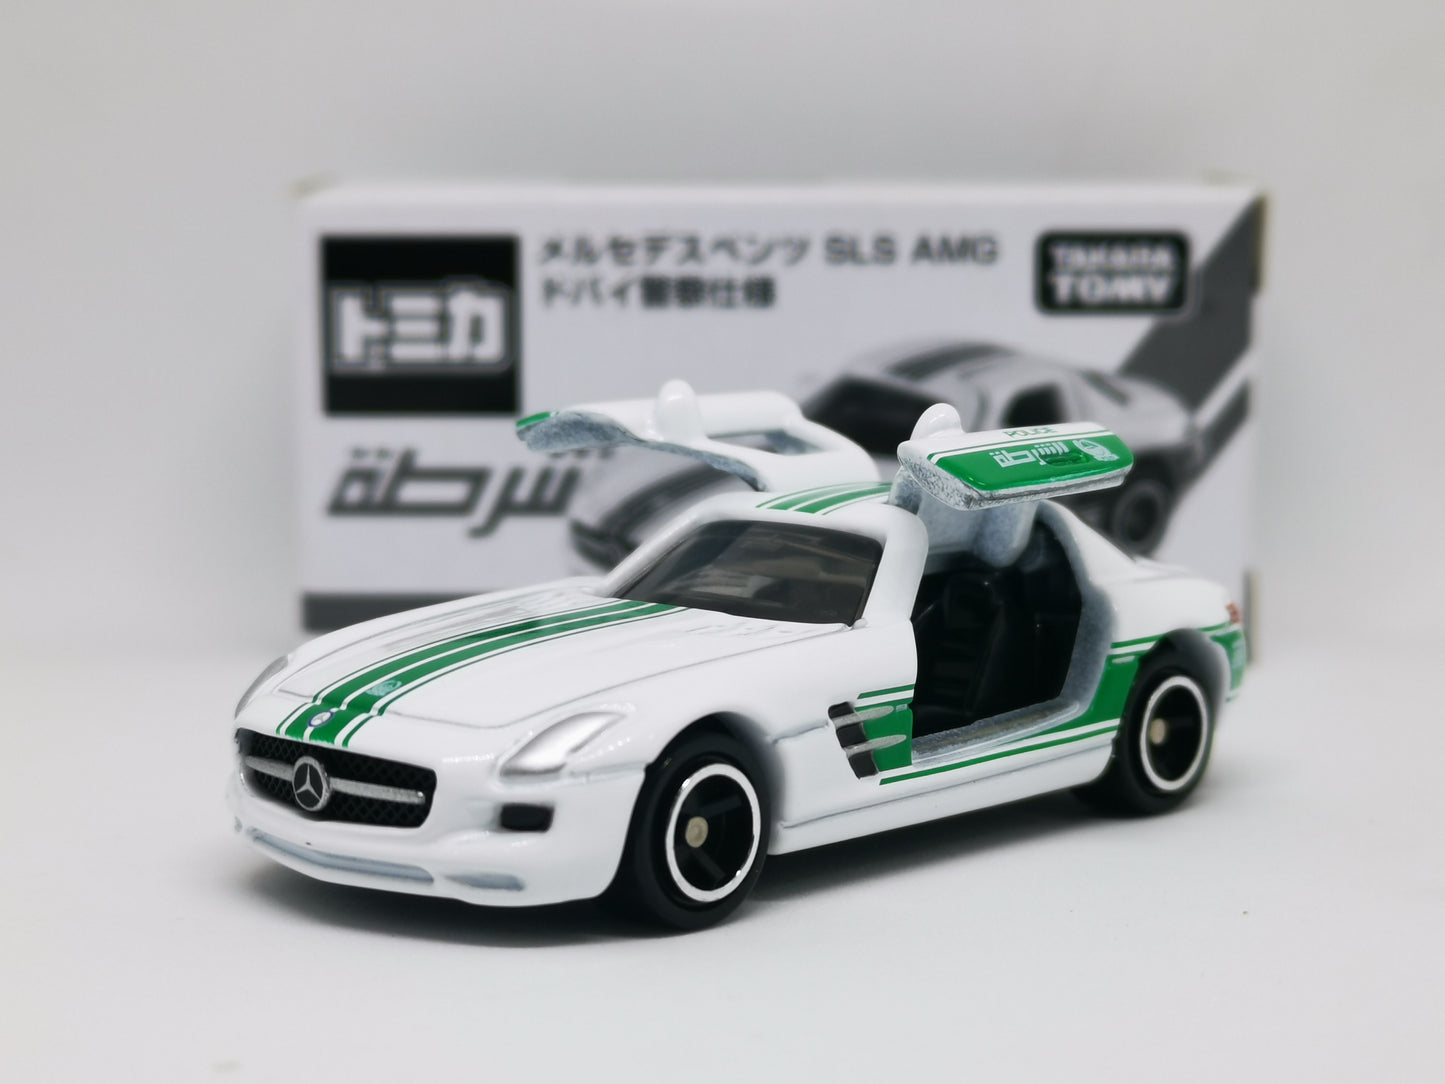 Tomica 2015 Mail In Lucky Draw Mercedes-Benz SLS AMG Dubai Police Car ver. 